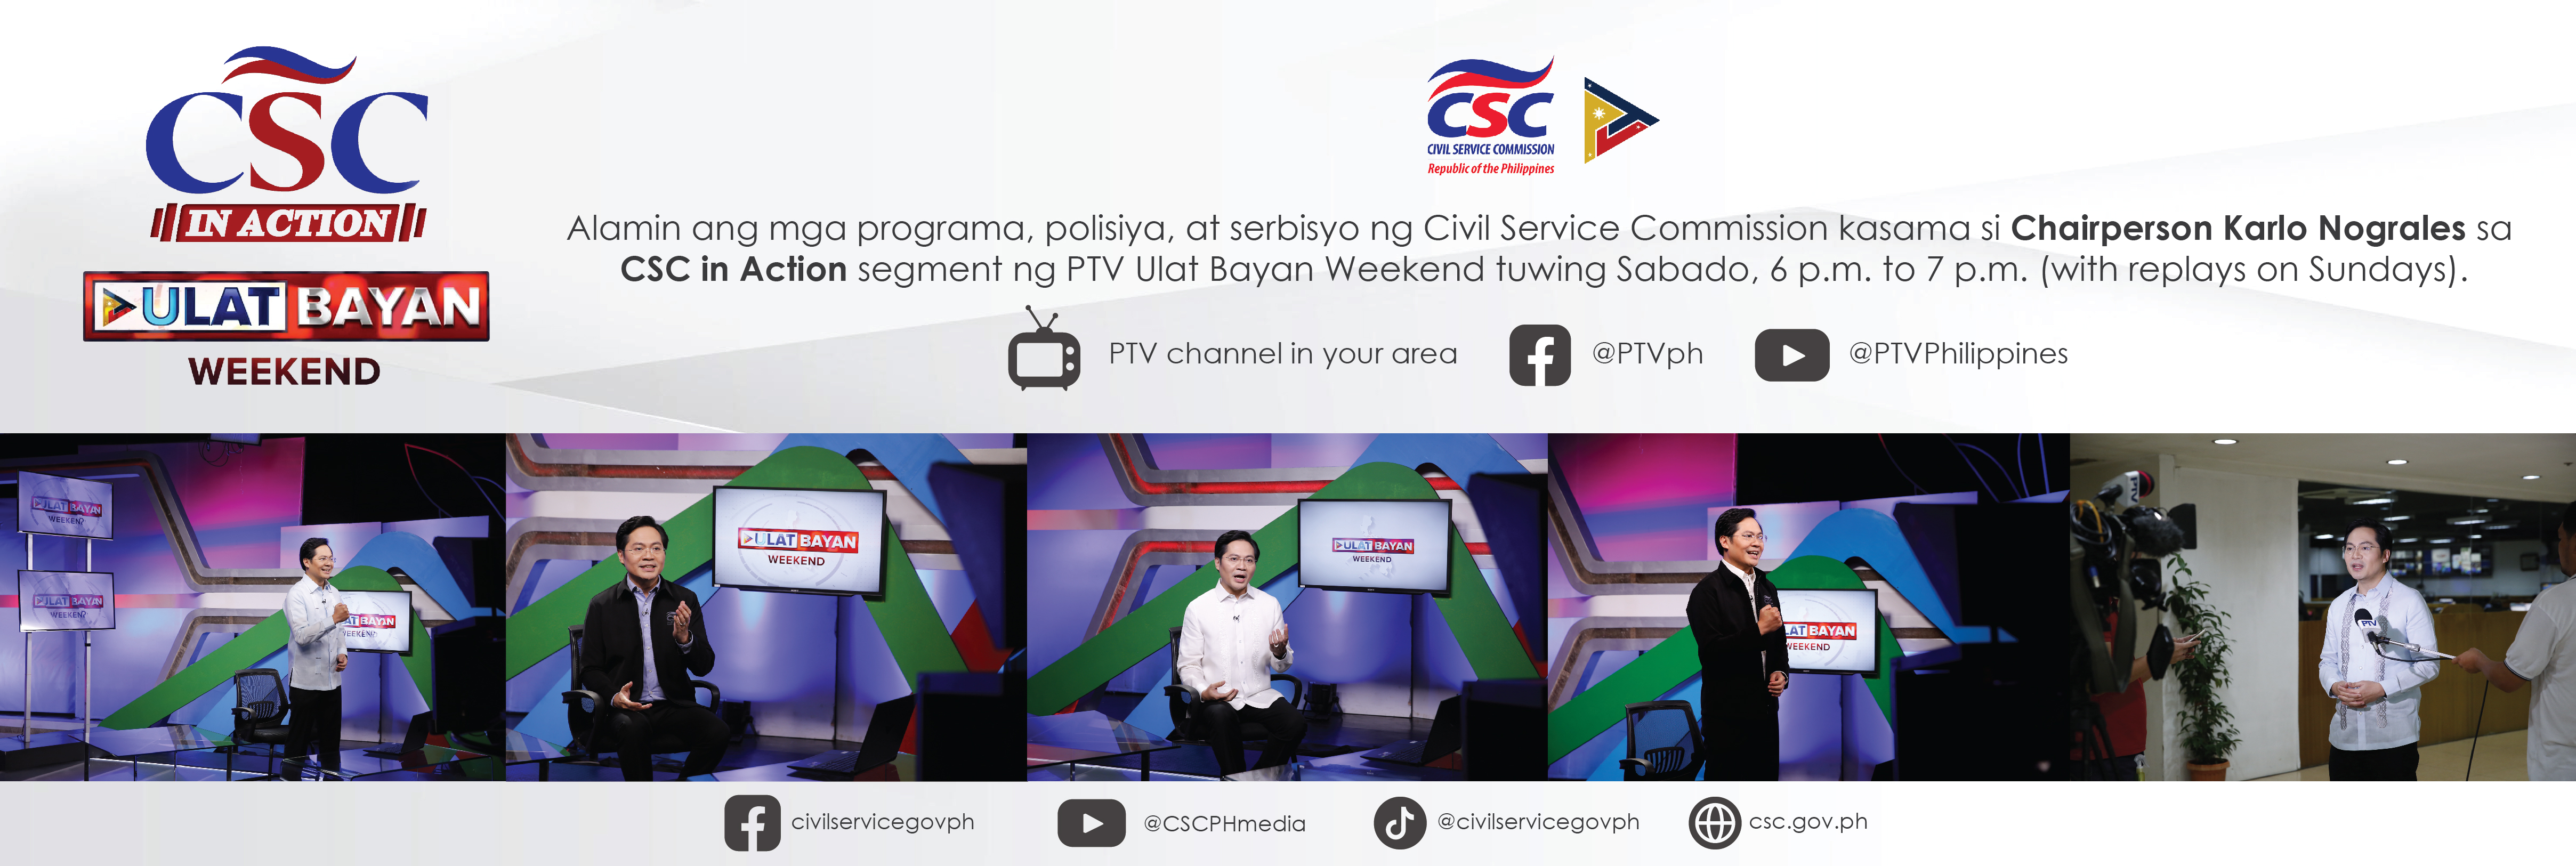 CSC in Action on PTV's Ulat Bayan Weekend